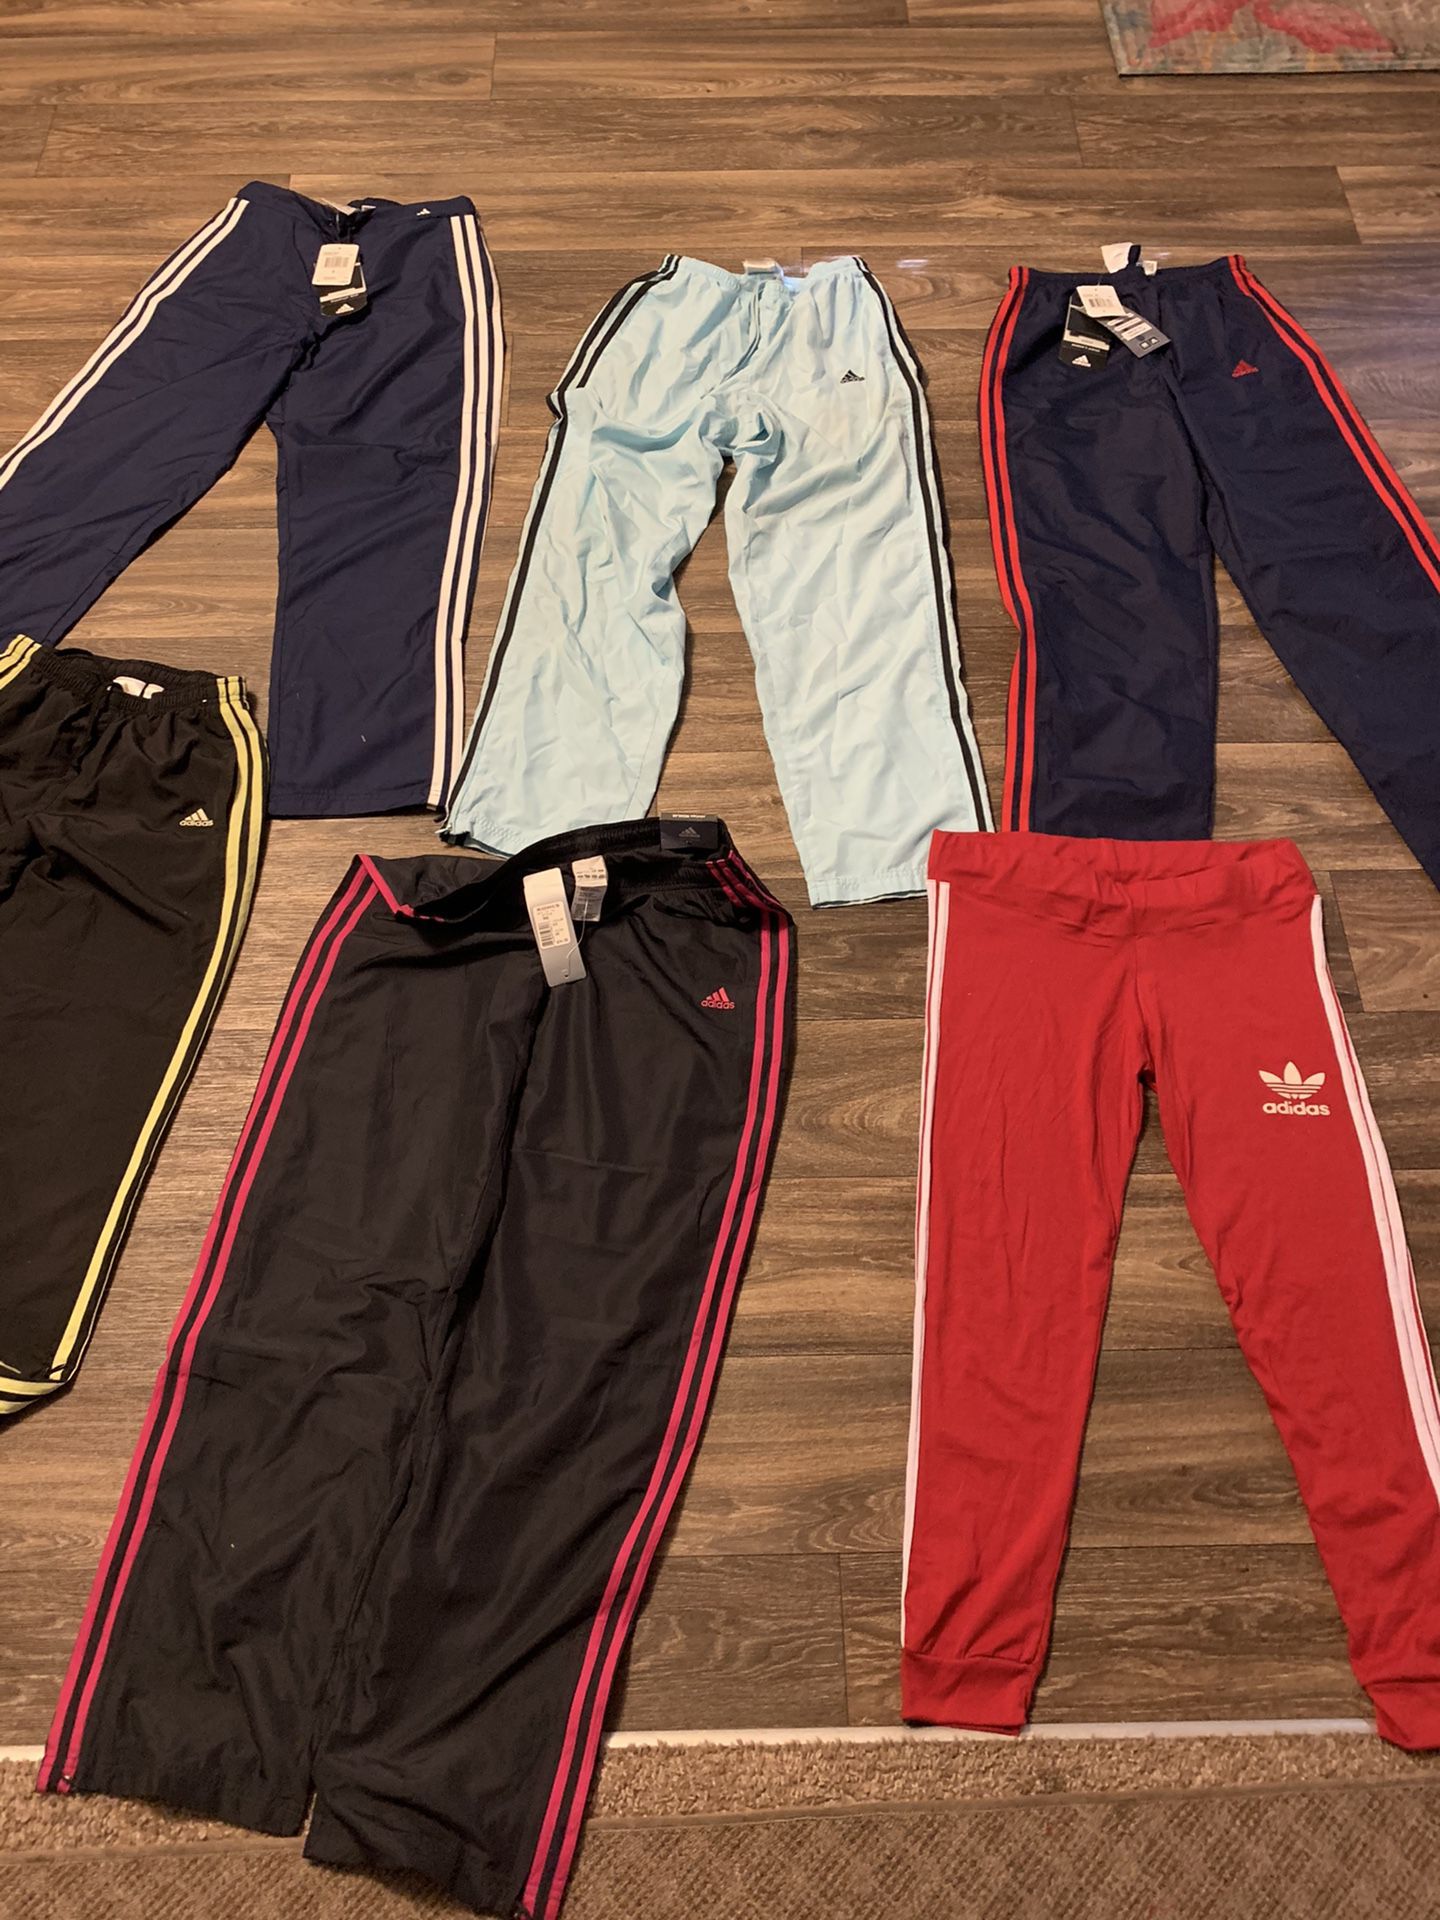 Six Adidas pants for $ 70.04 size Small and two size M